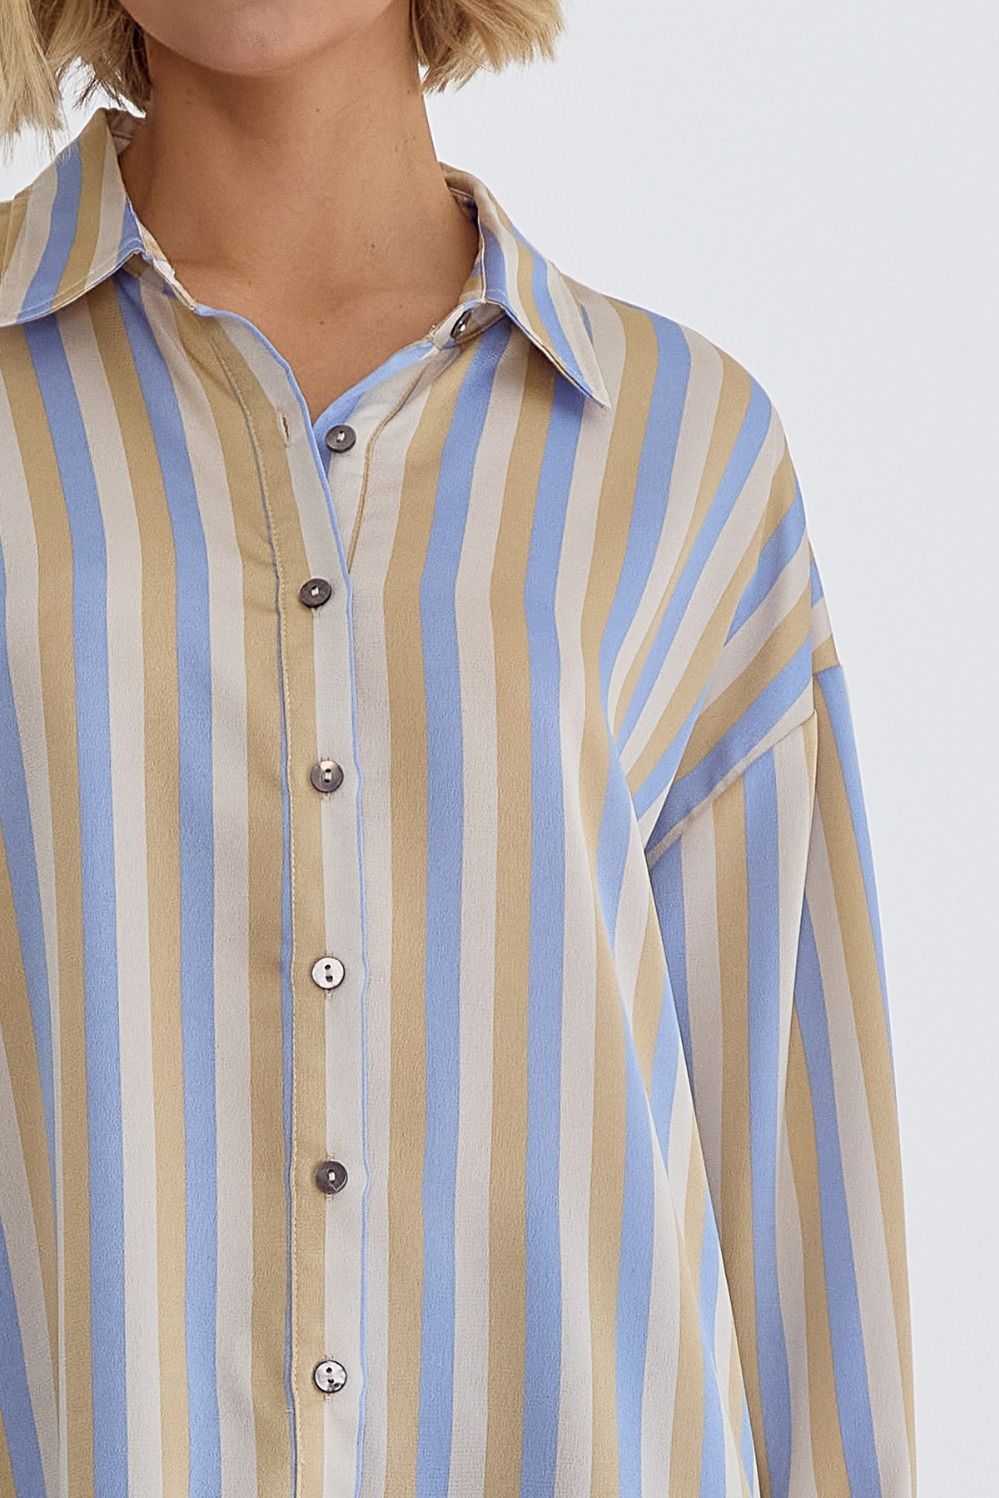 Stripes Like Burberry Top In Blue